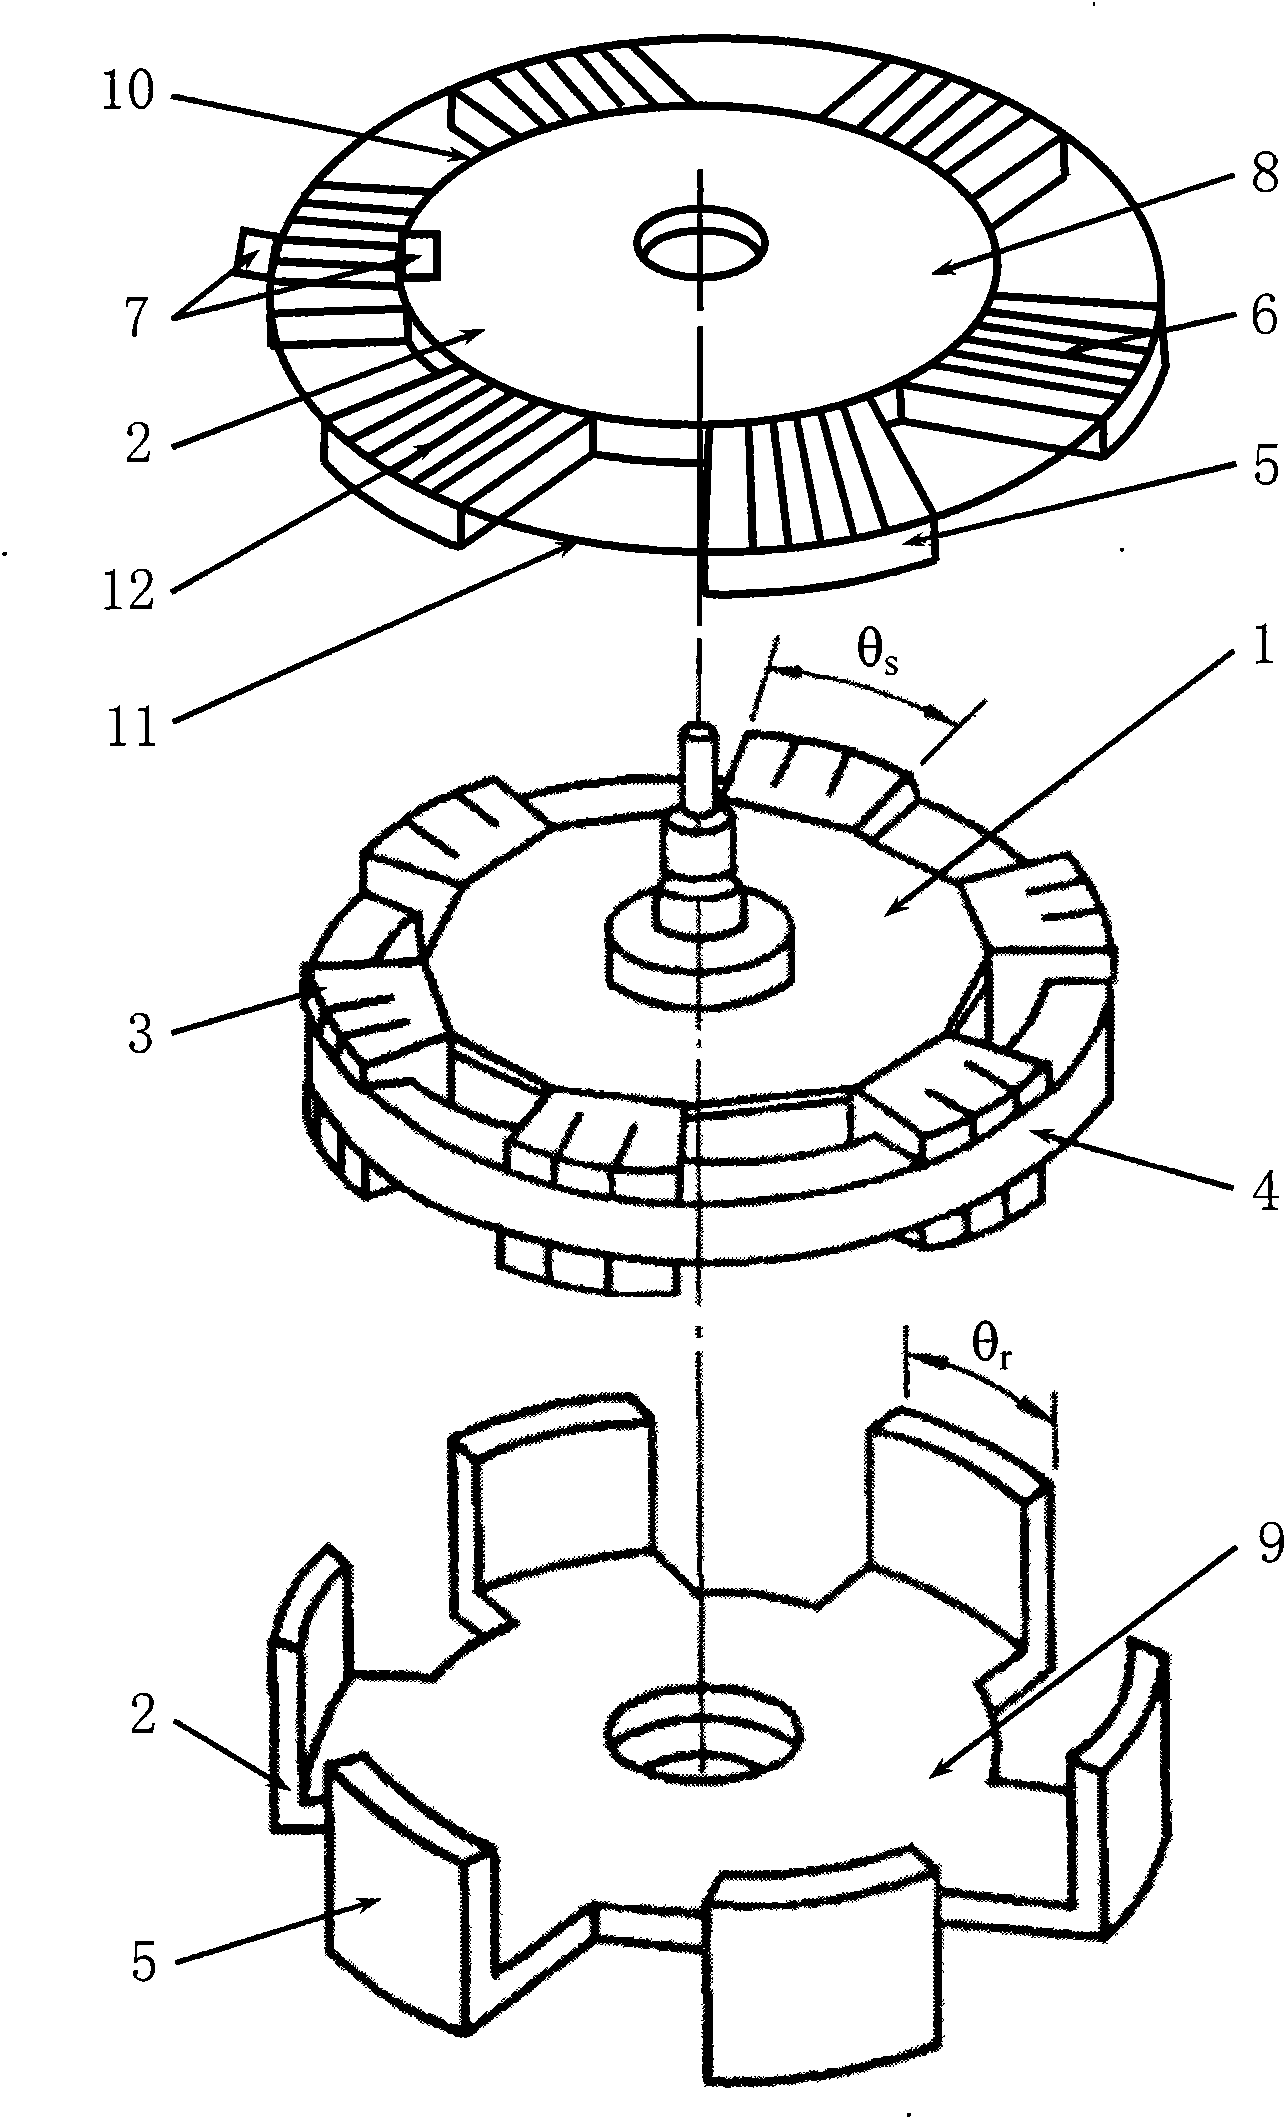 Single-phase switch reluctance multifunctional motor with starting winding